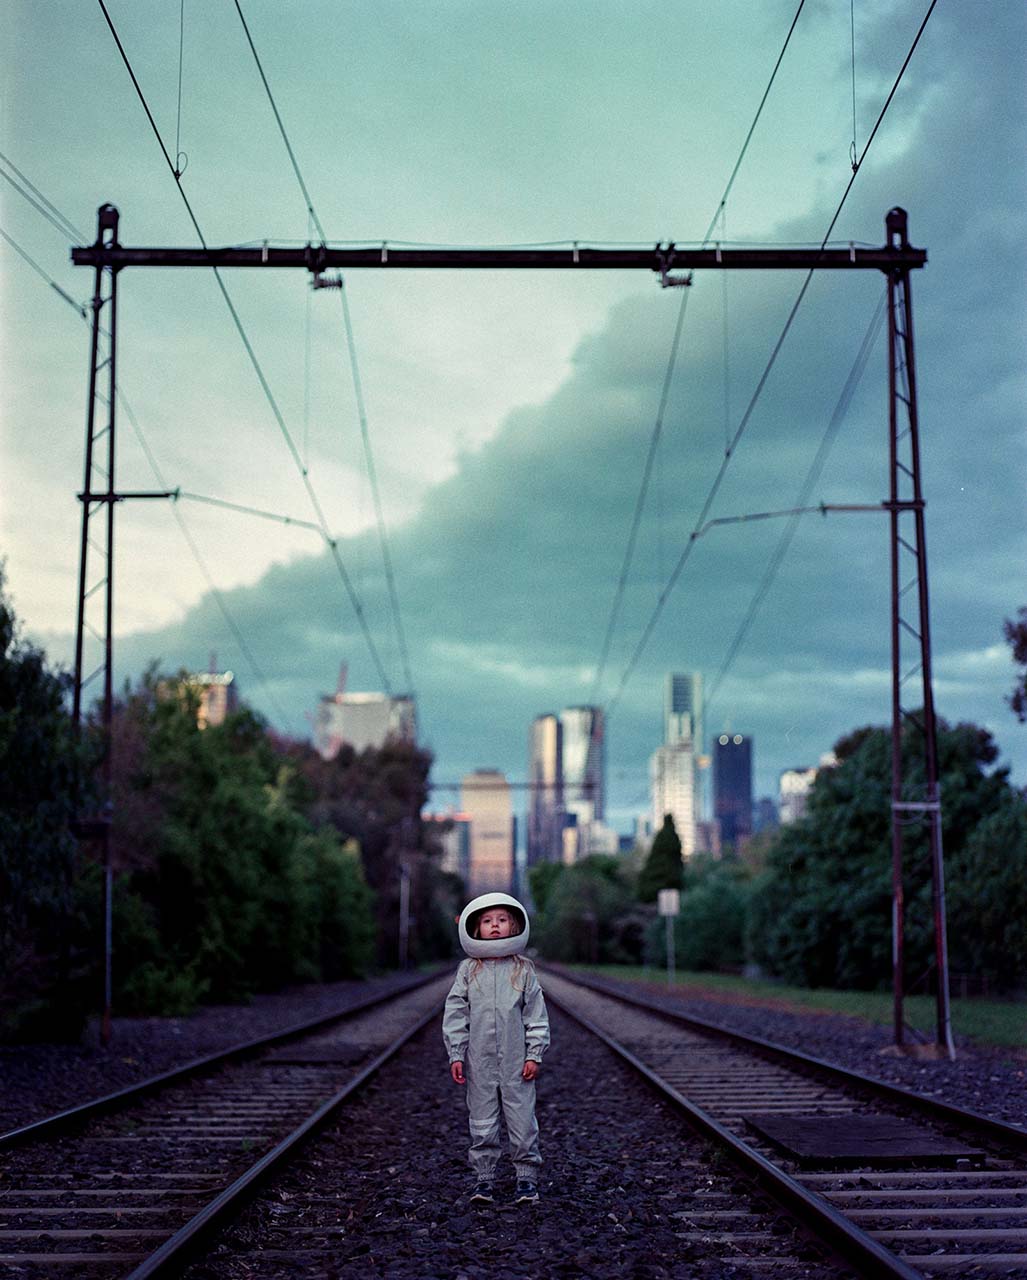 A young girl wearing a spacesuit costume and helmet stands on a train track with a city skyline behind her